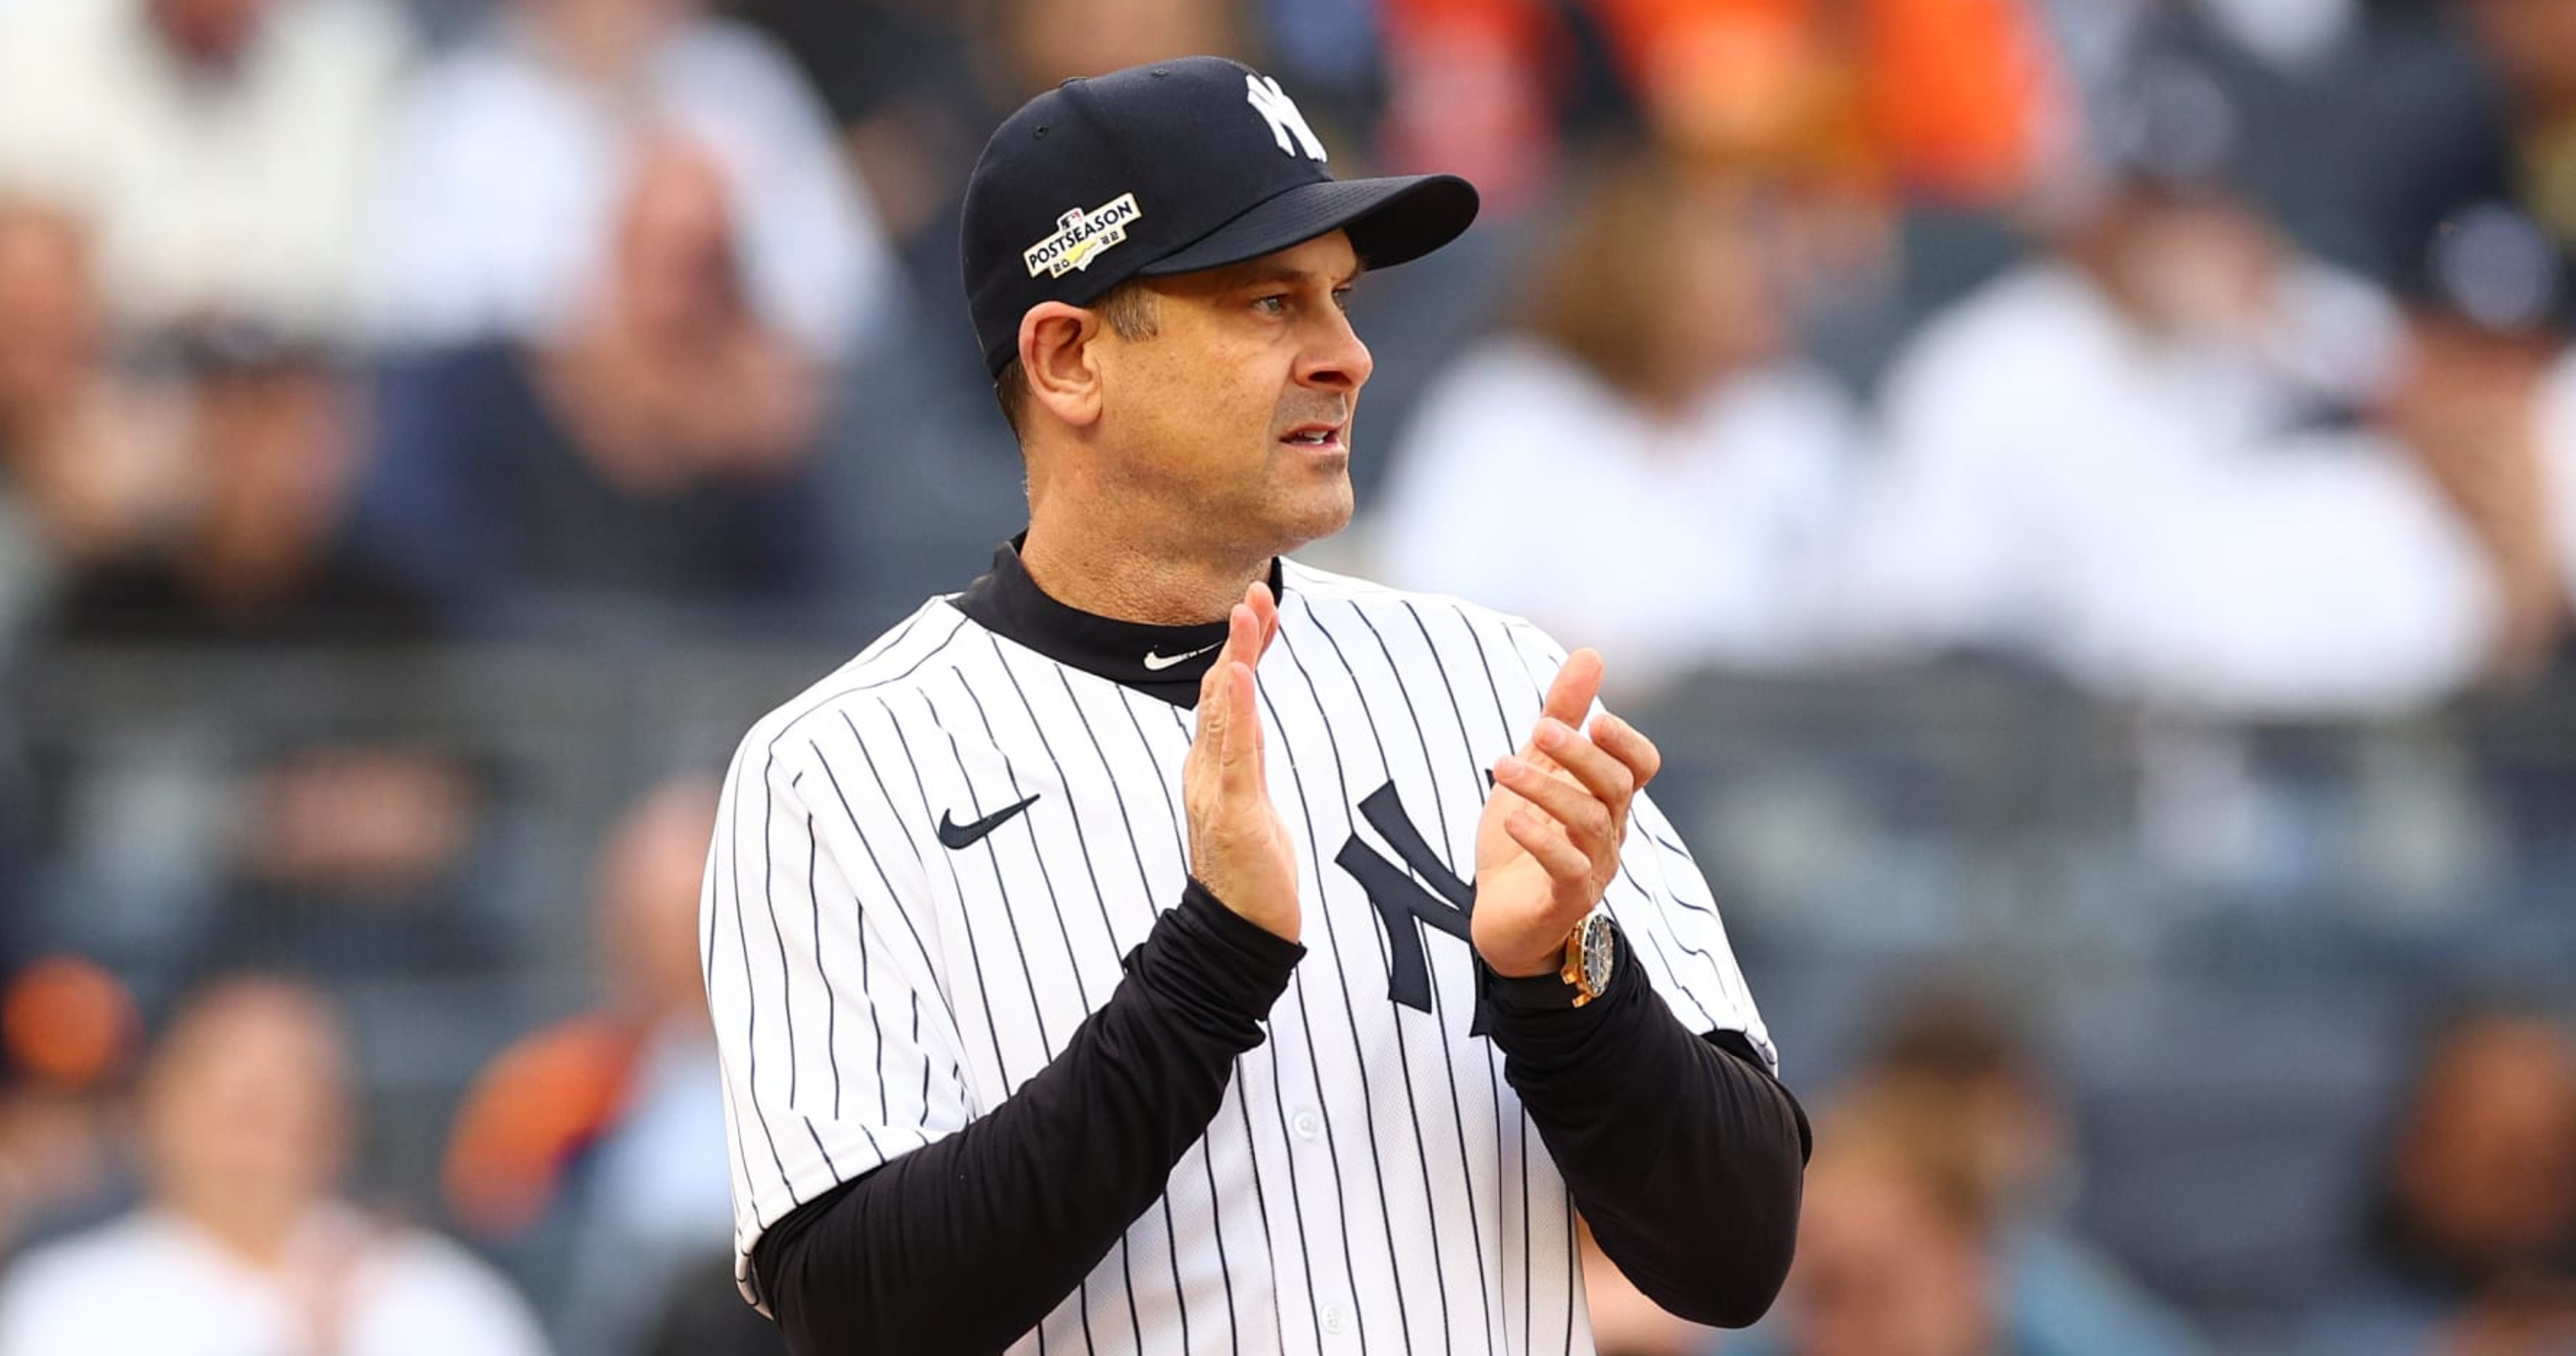 Aaron Boone is expected to be back as the Yankees manager, per Andy Martino